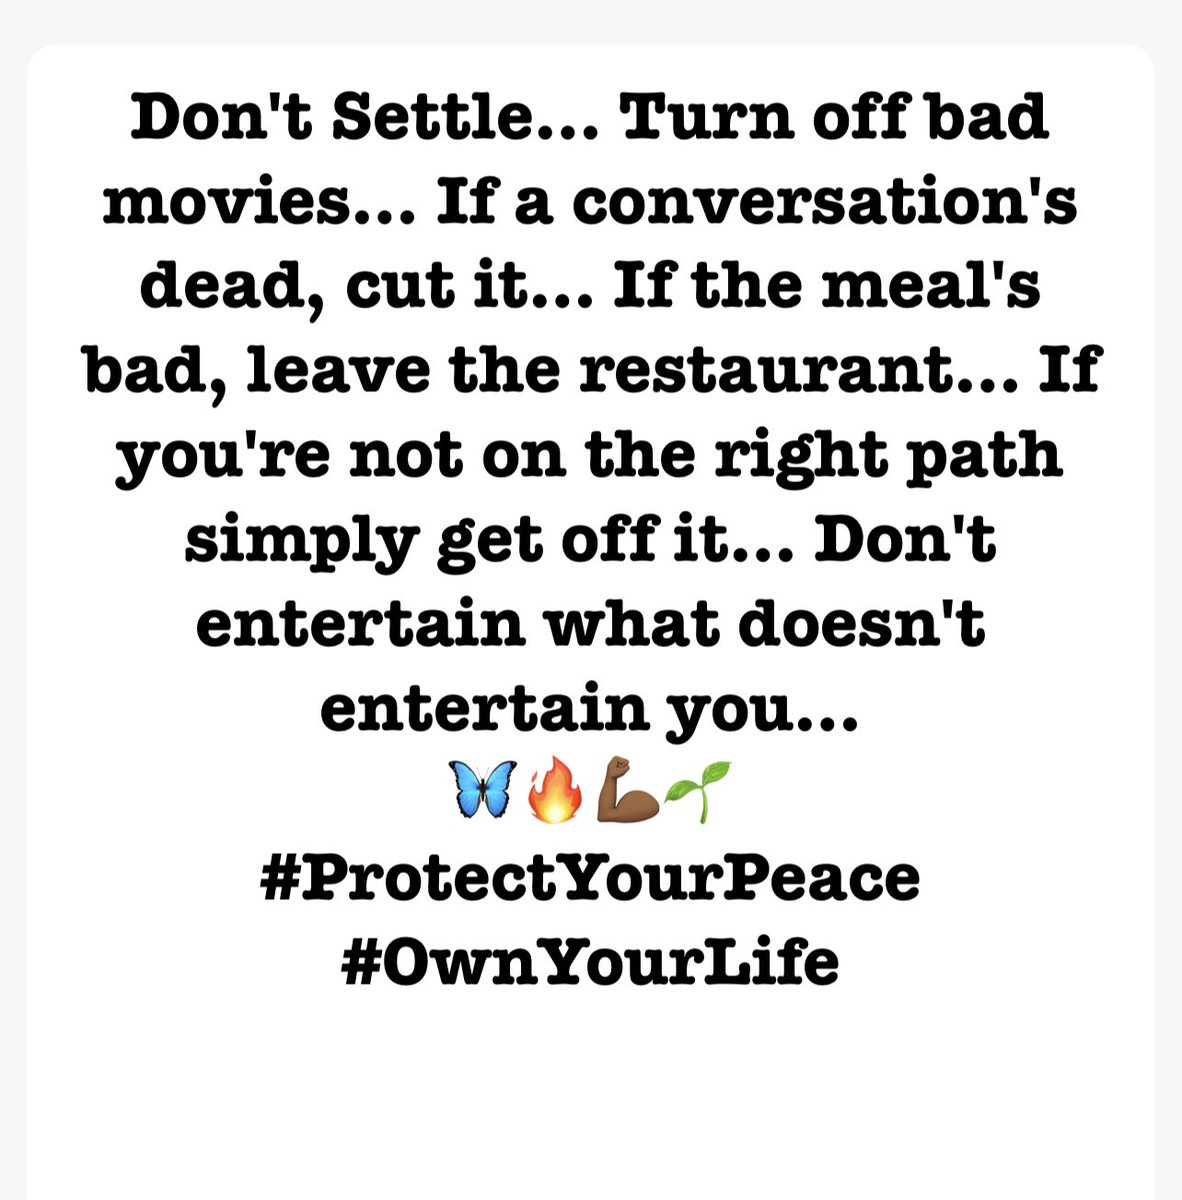 Don't Settle… Turn off bad movies… If a conversation's dead, cut it… If the meal's bad, leave the restaurant… If you're not on the right path simply get off it… Don't entertain what doesn't entertain you… 🌺🌸🌼🌻 
— @itsemily 
🦋🔥💪🏾🌱
#ProtectYourPeace #OwnYourLife